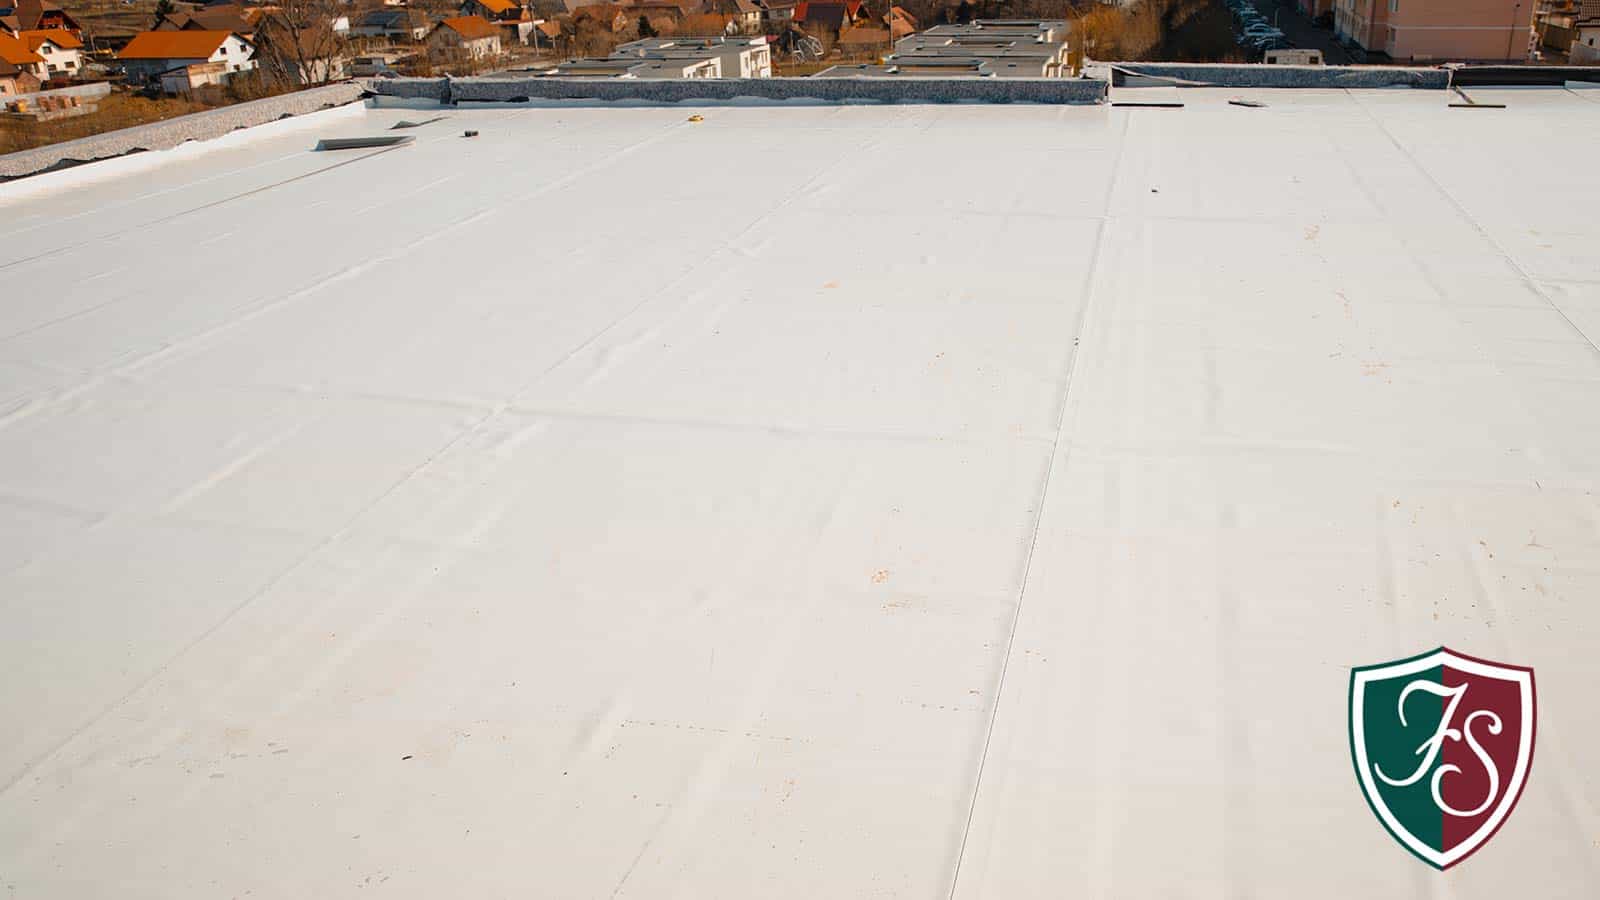 PVC roofing is cost-effective, efficient, and recyclable.